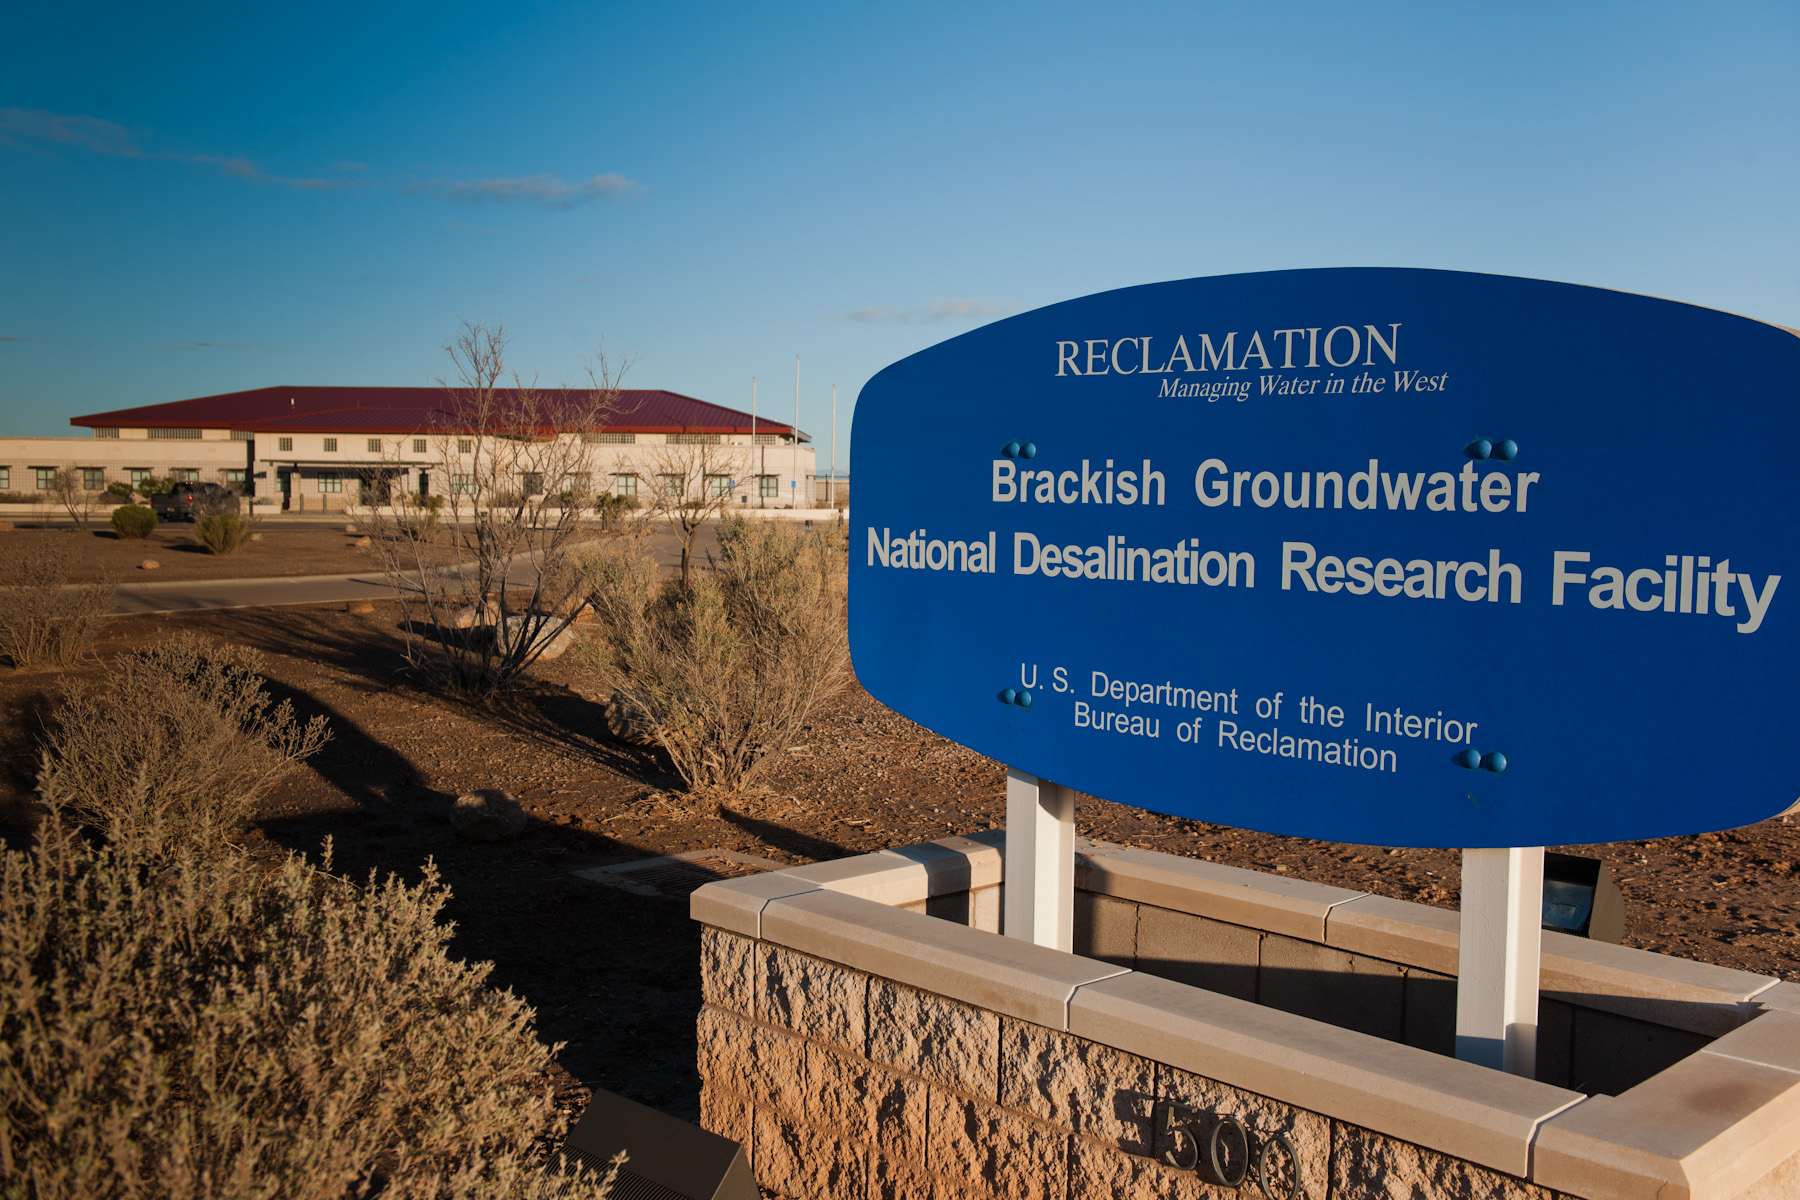 Image of Brackish Groundwater National Desalination Research Facility.